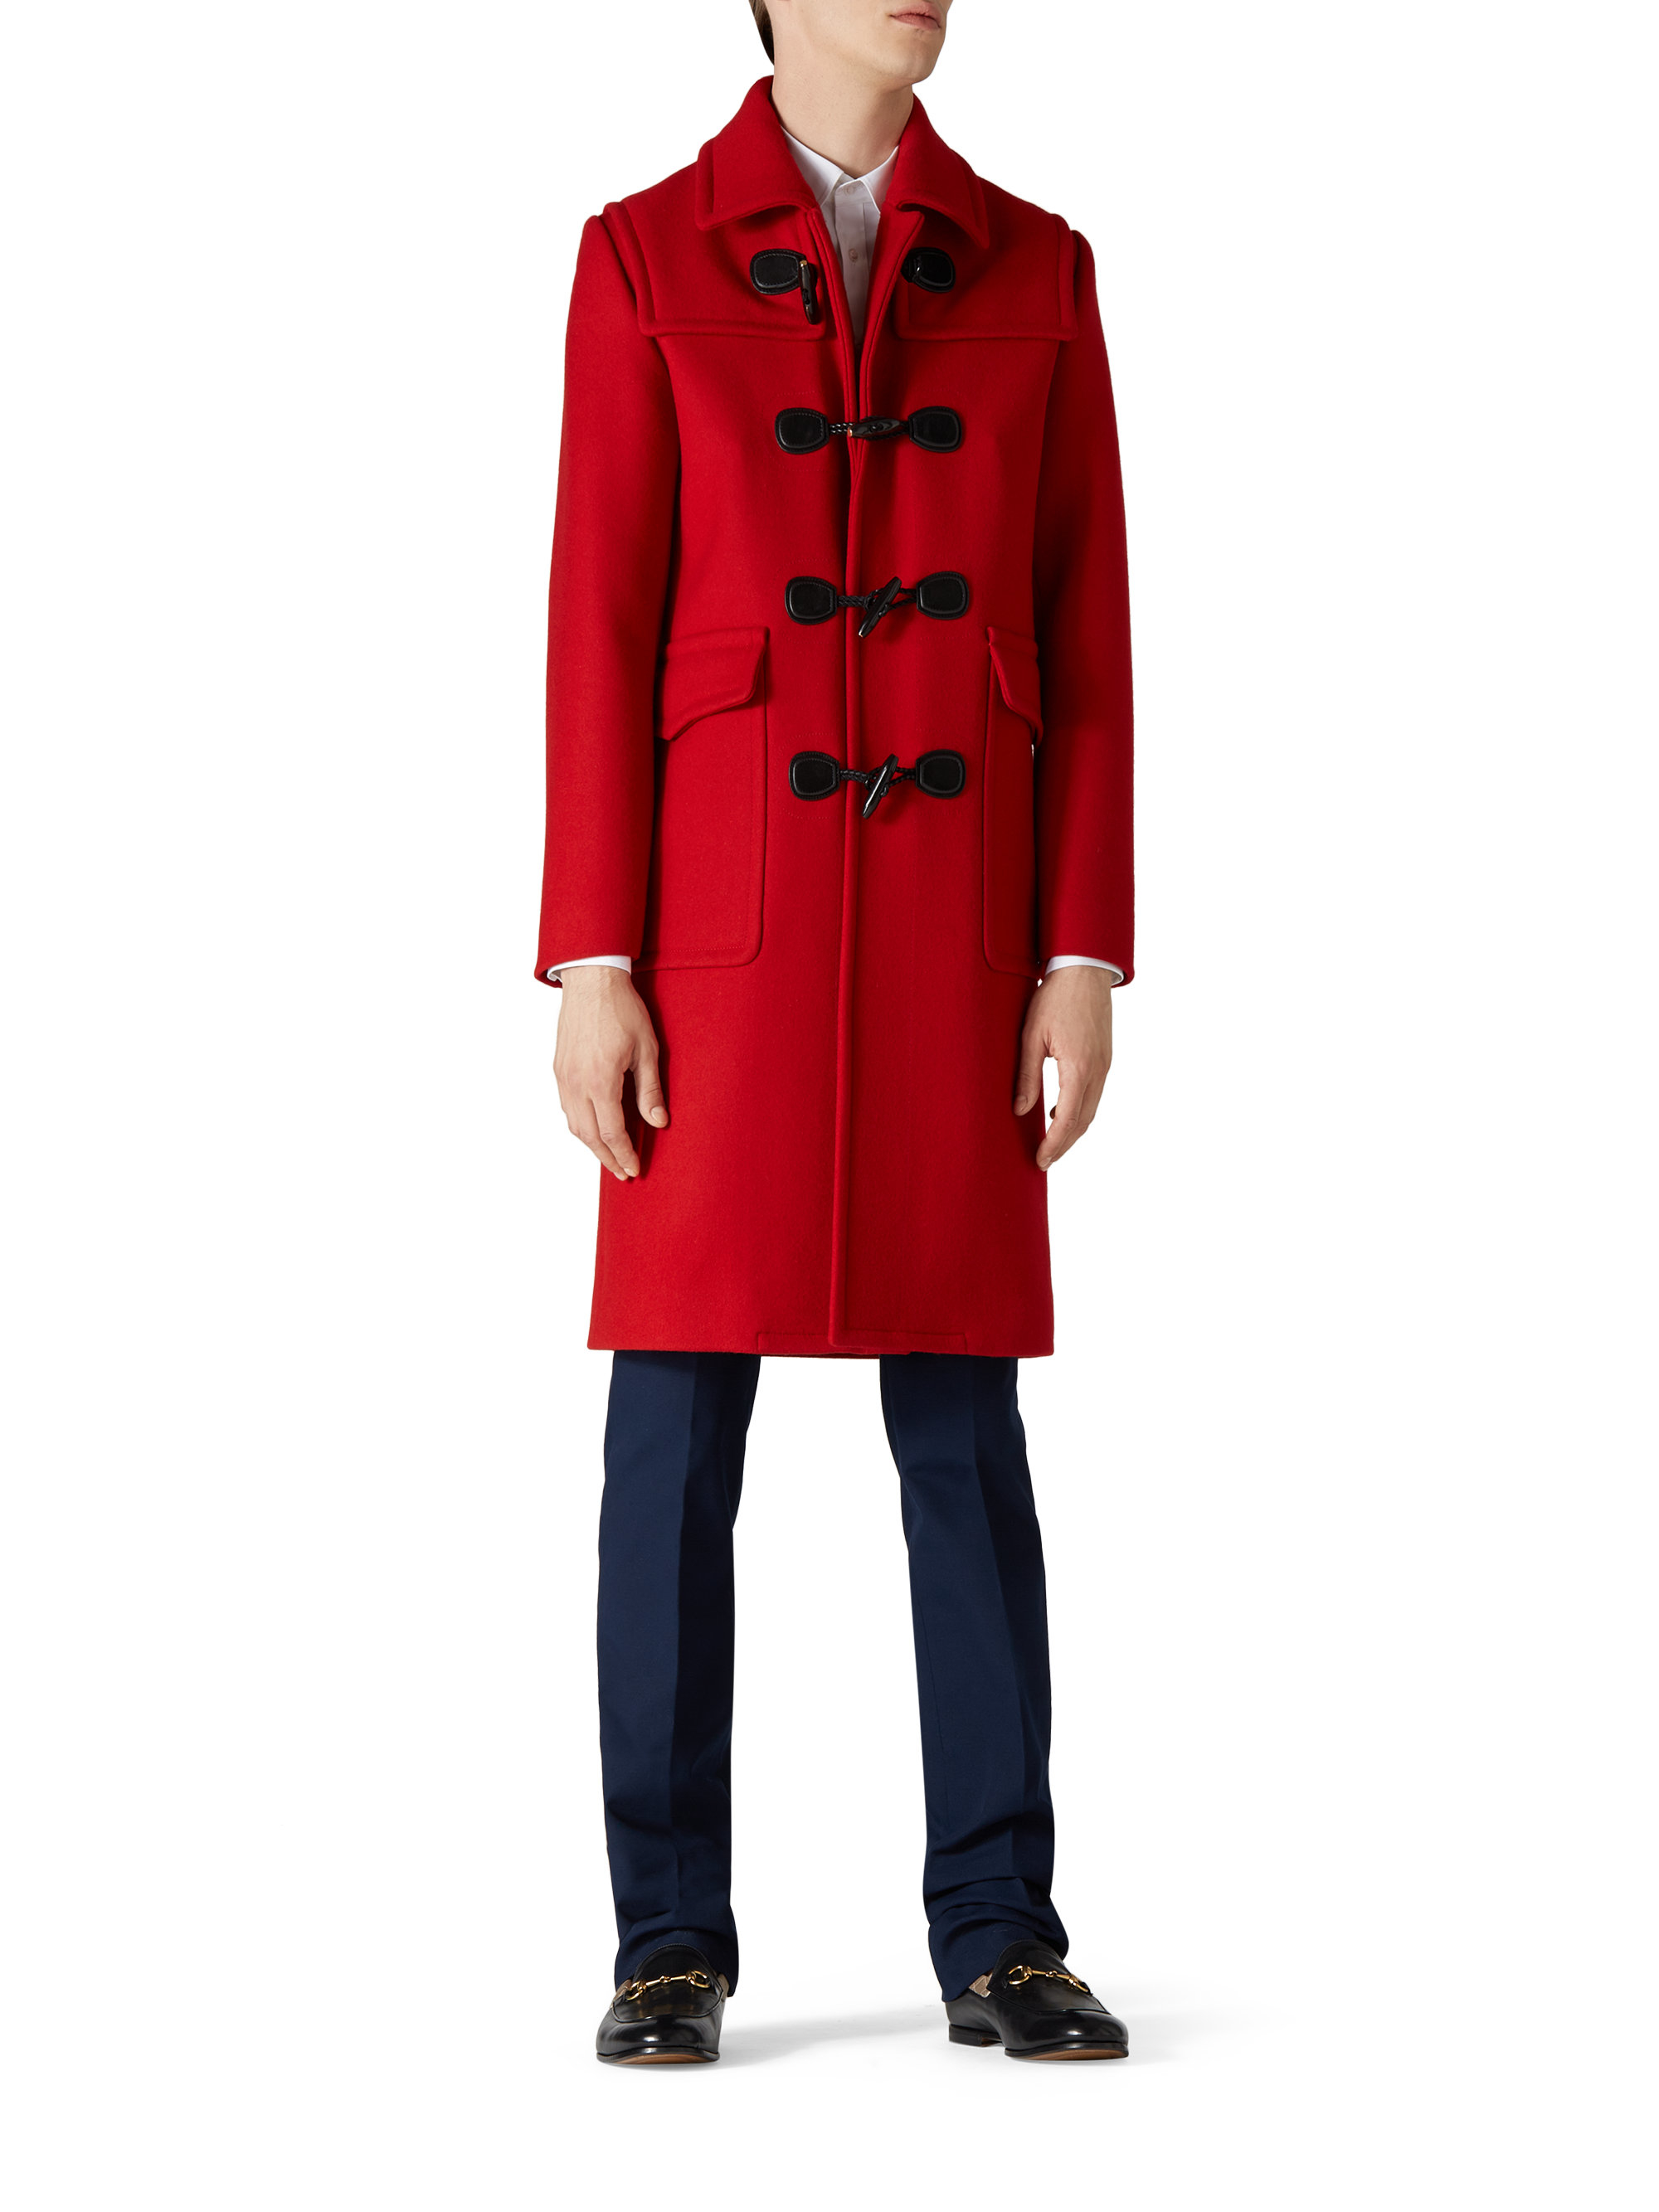 Gucci Montgomery Wool Twill Coat in Red for Men - Lyst